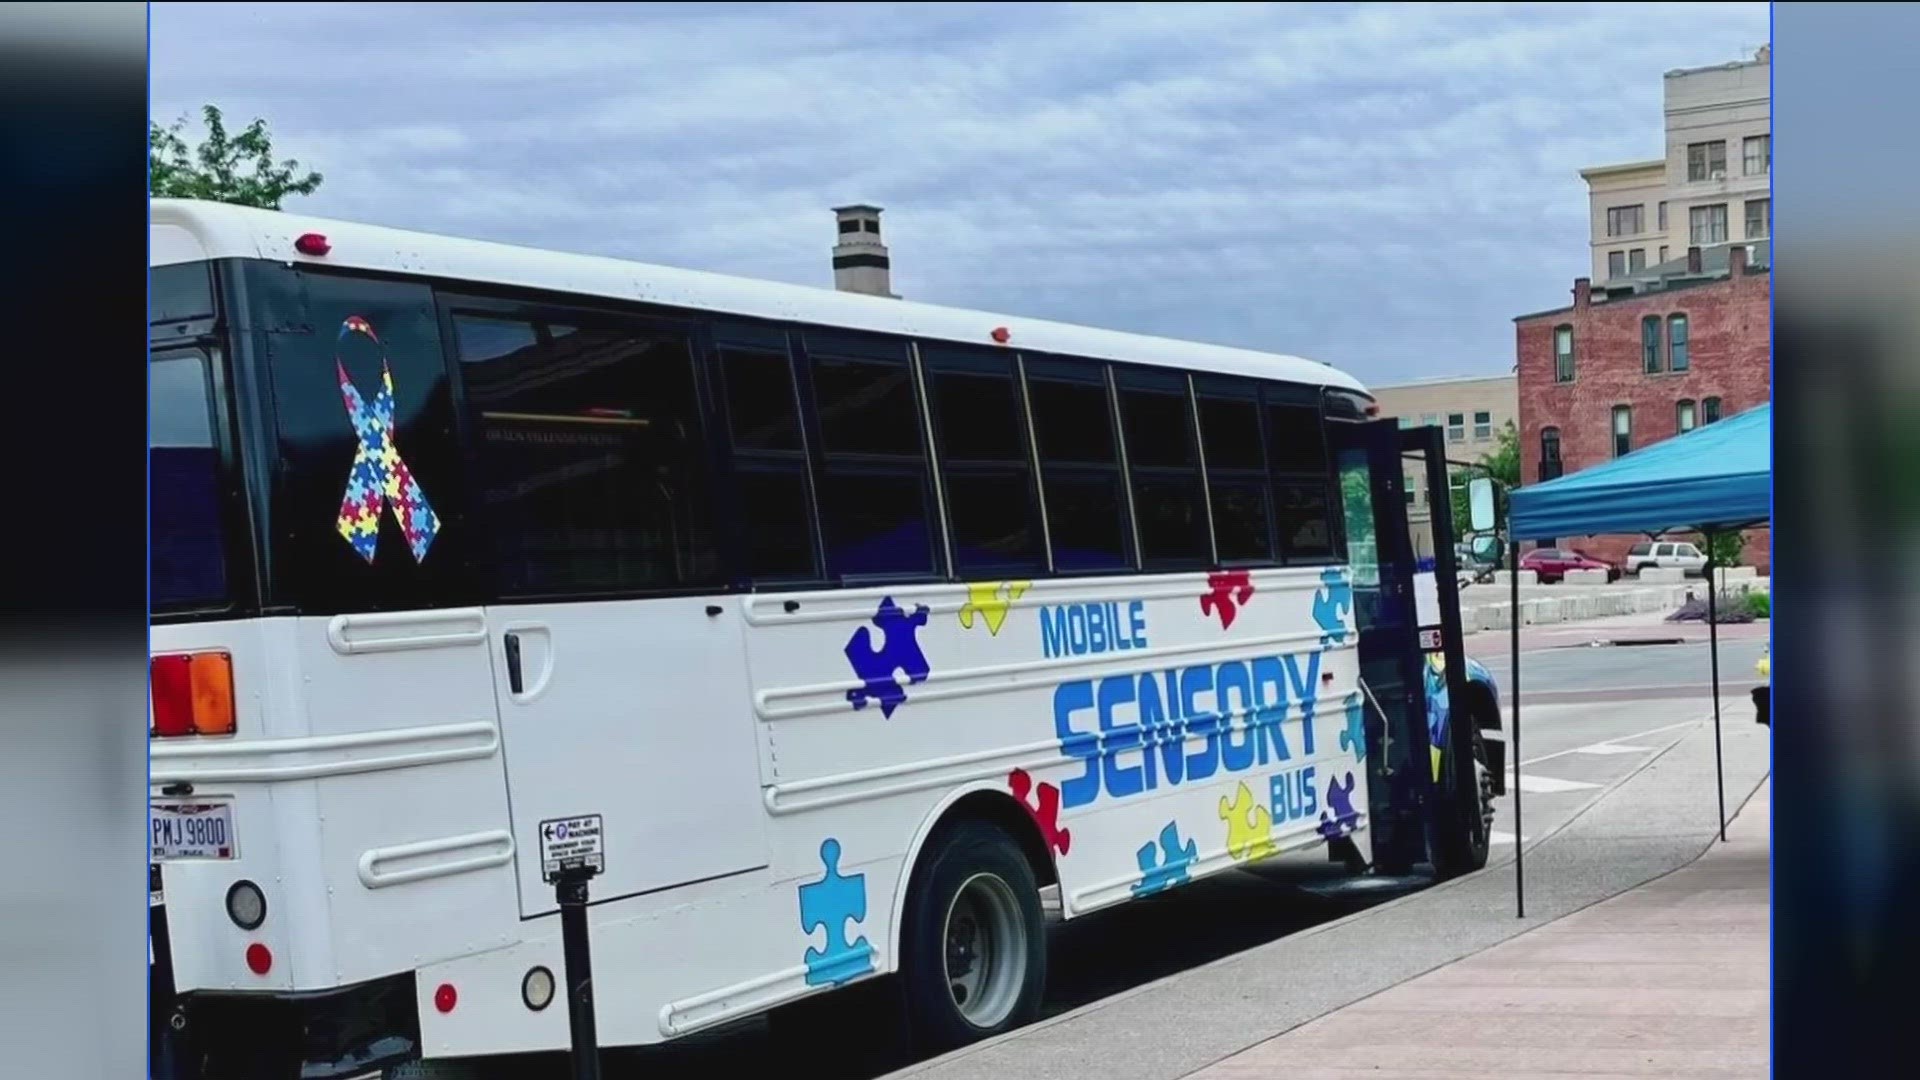 The bus is a sensory-friendly environment meant to provide a safe space away from overwhelming events.